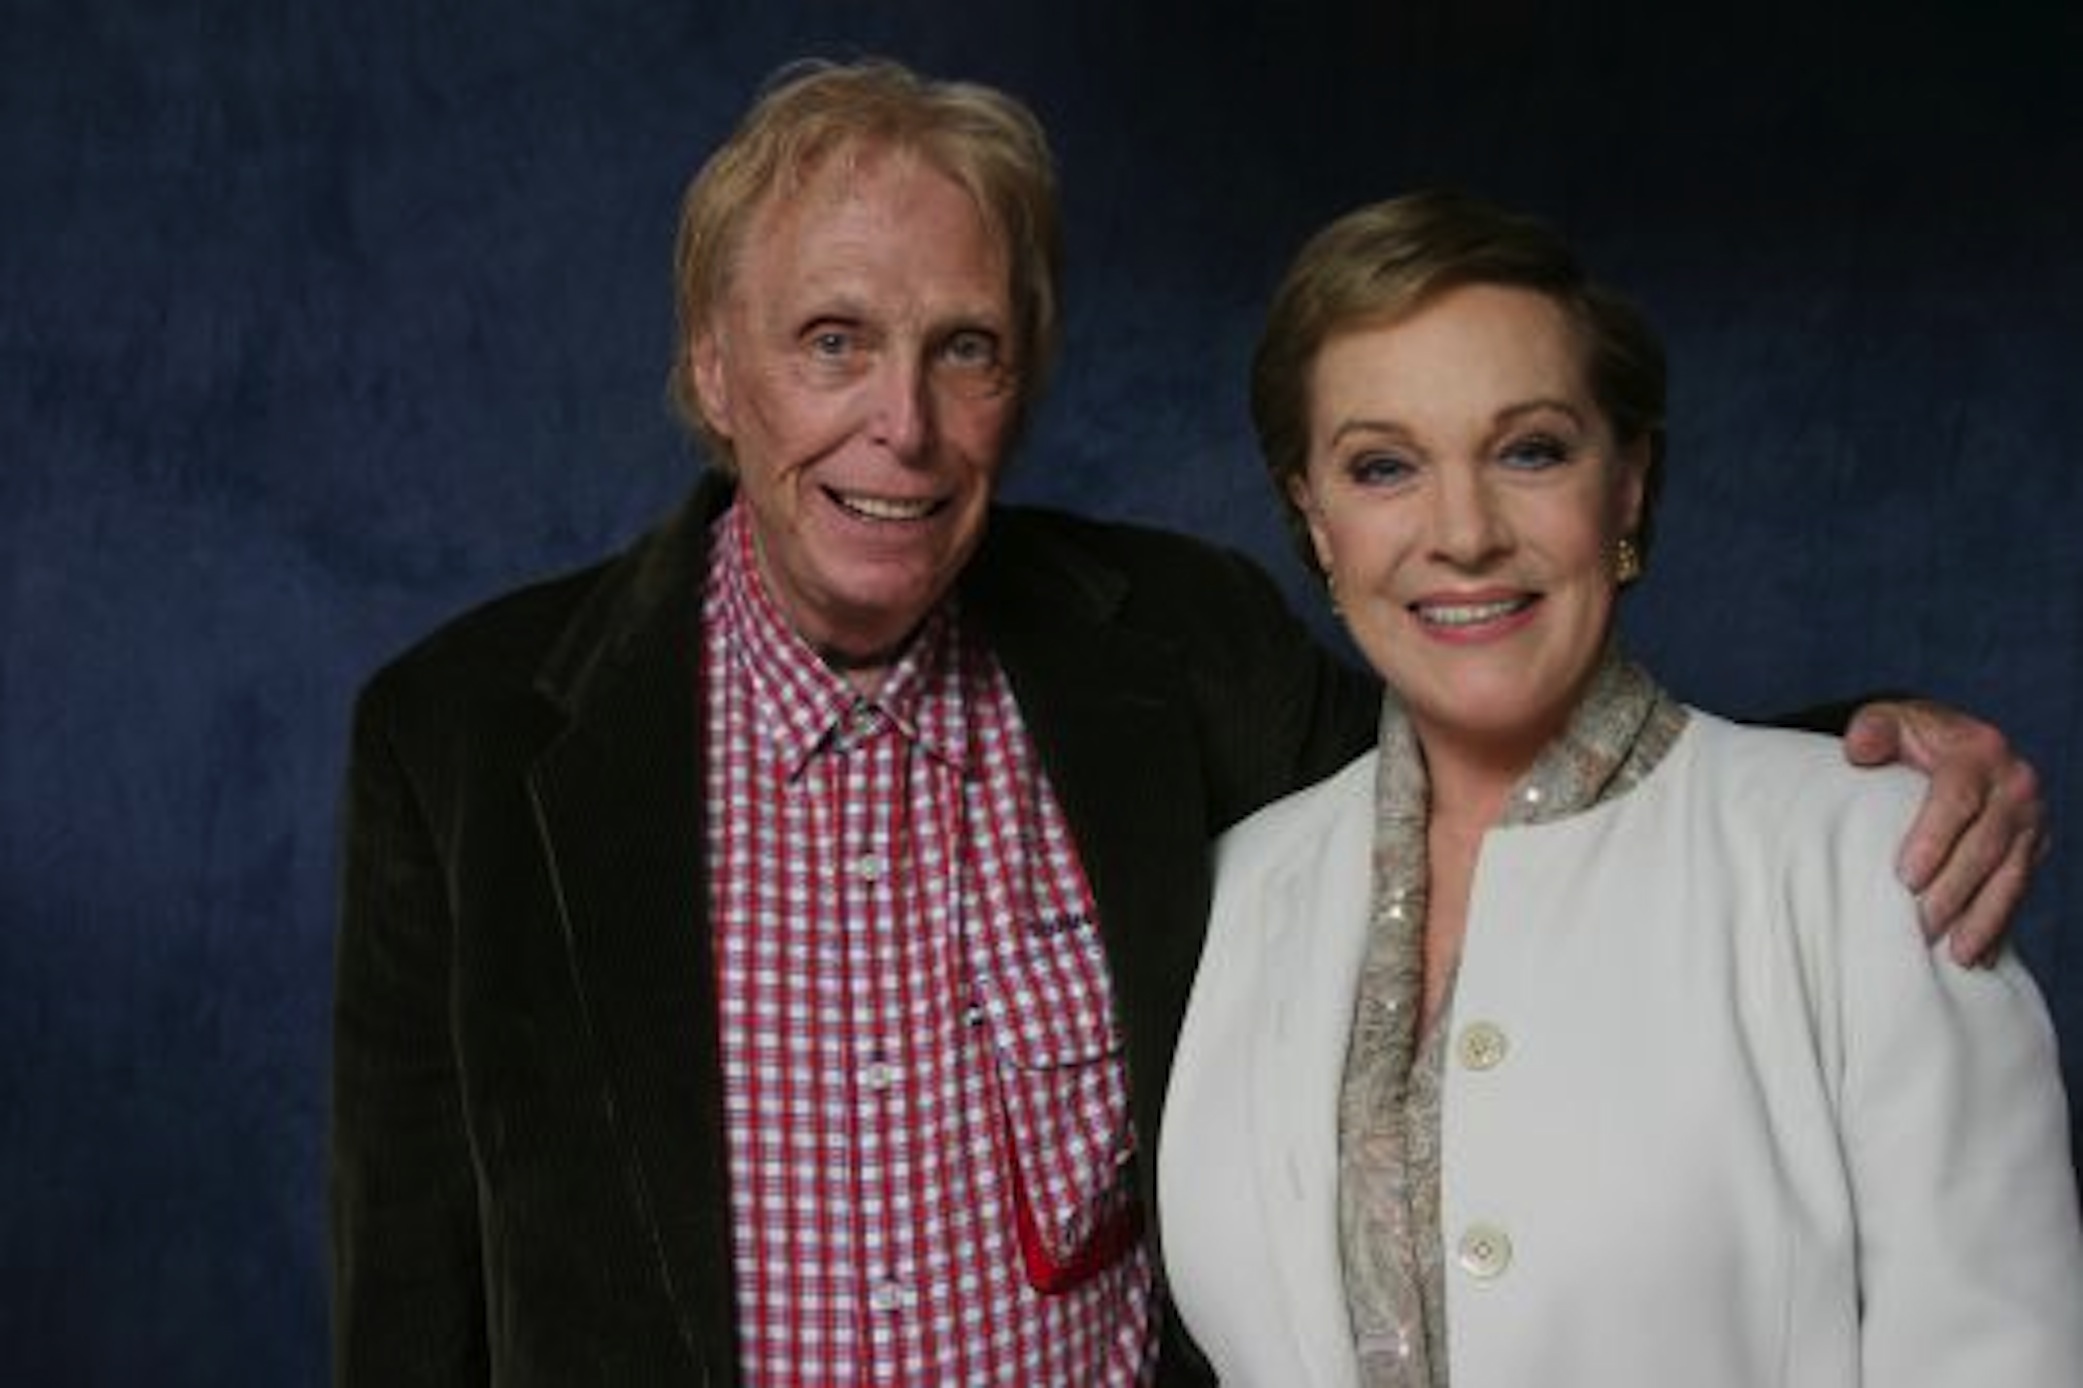 With Julie Andrews